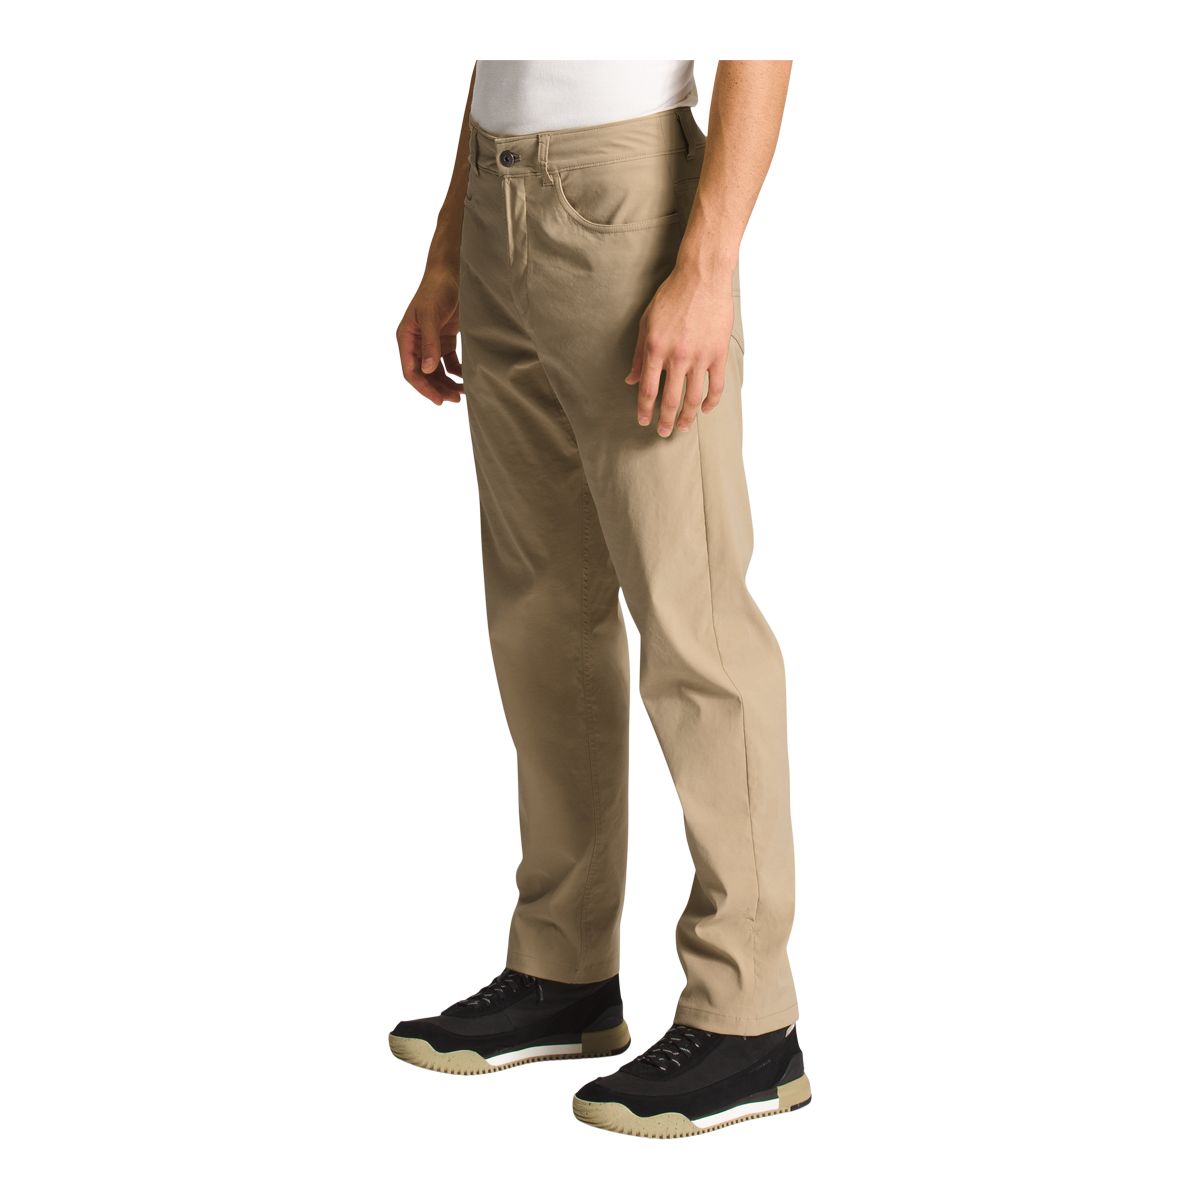 https://media-www.sportchek.ca/product/div-03-softgoods/dpt-72-casual-clothing/sdpt-01-mens/334063196/the-north-face-men-s-sprag-5-pocket-pants-fdf6efac-21e2-4f33-a924-036768856100-jpgrendition.jpg?imdensity=1&imwidth=1244&impolicy=mZoom